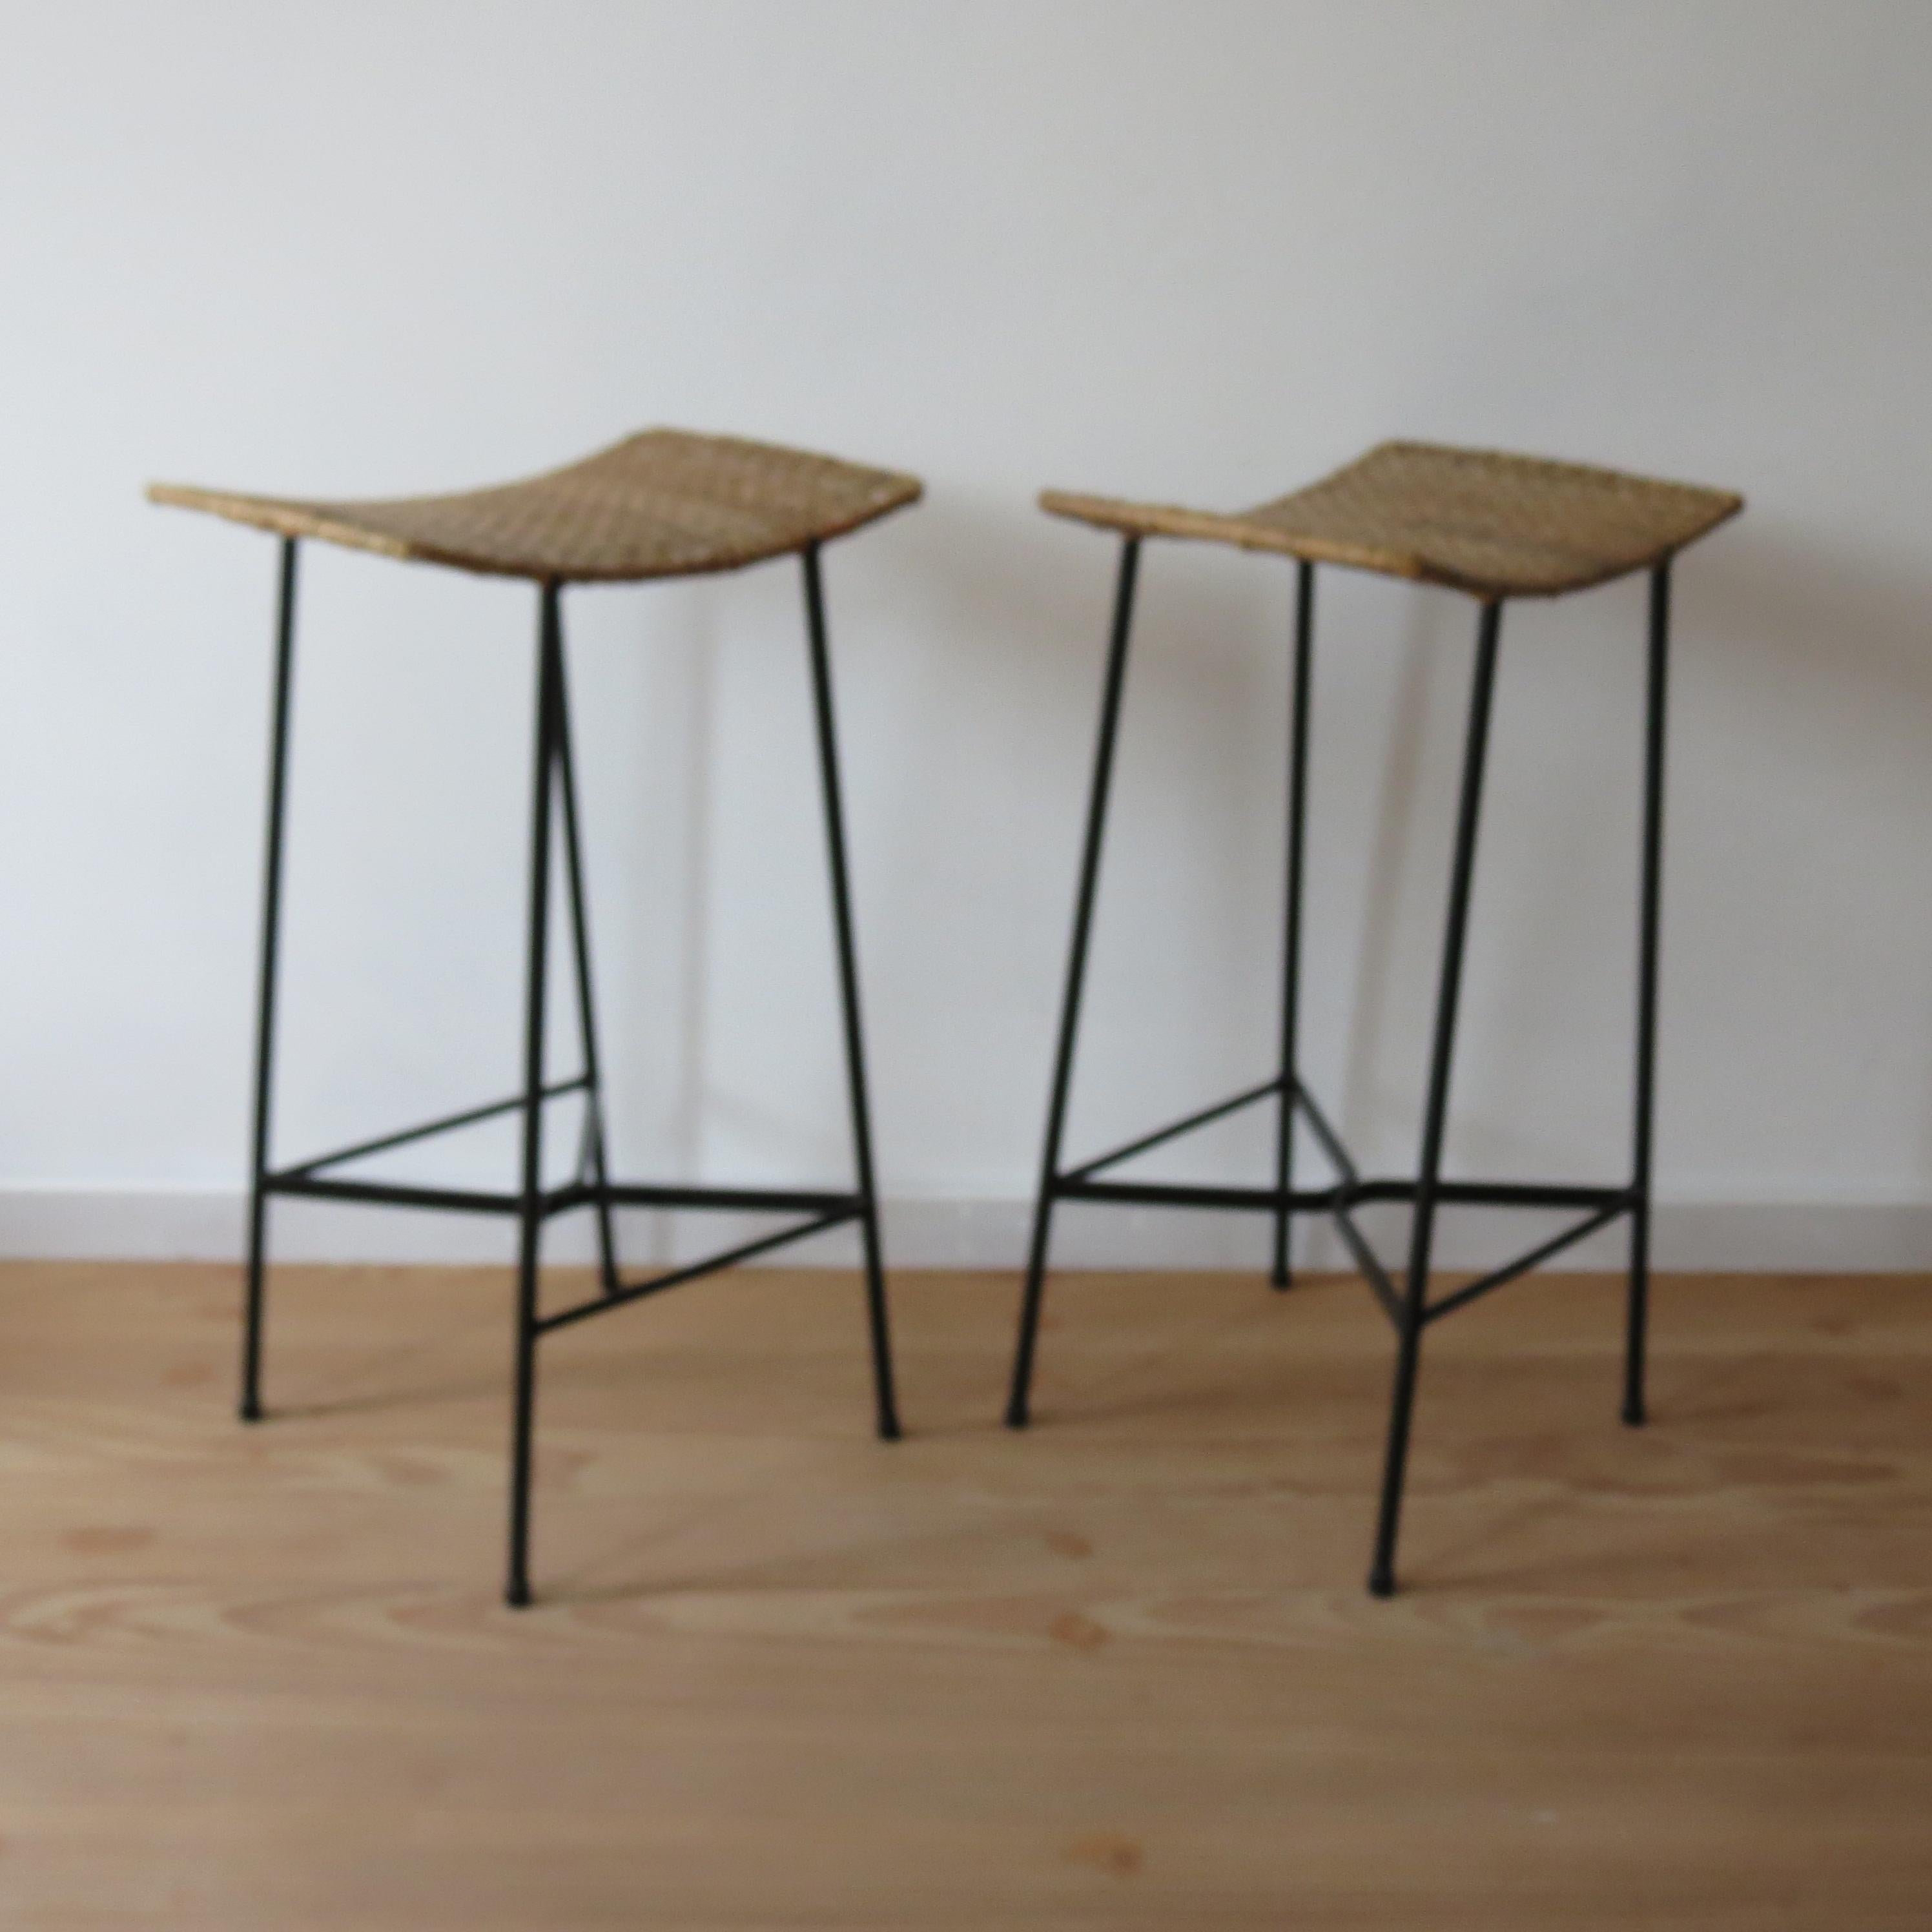 English Pair of 1960s Vintage Black Metal and Cane Wicker stools